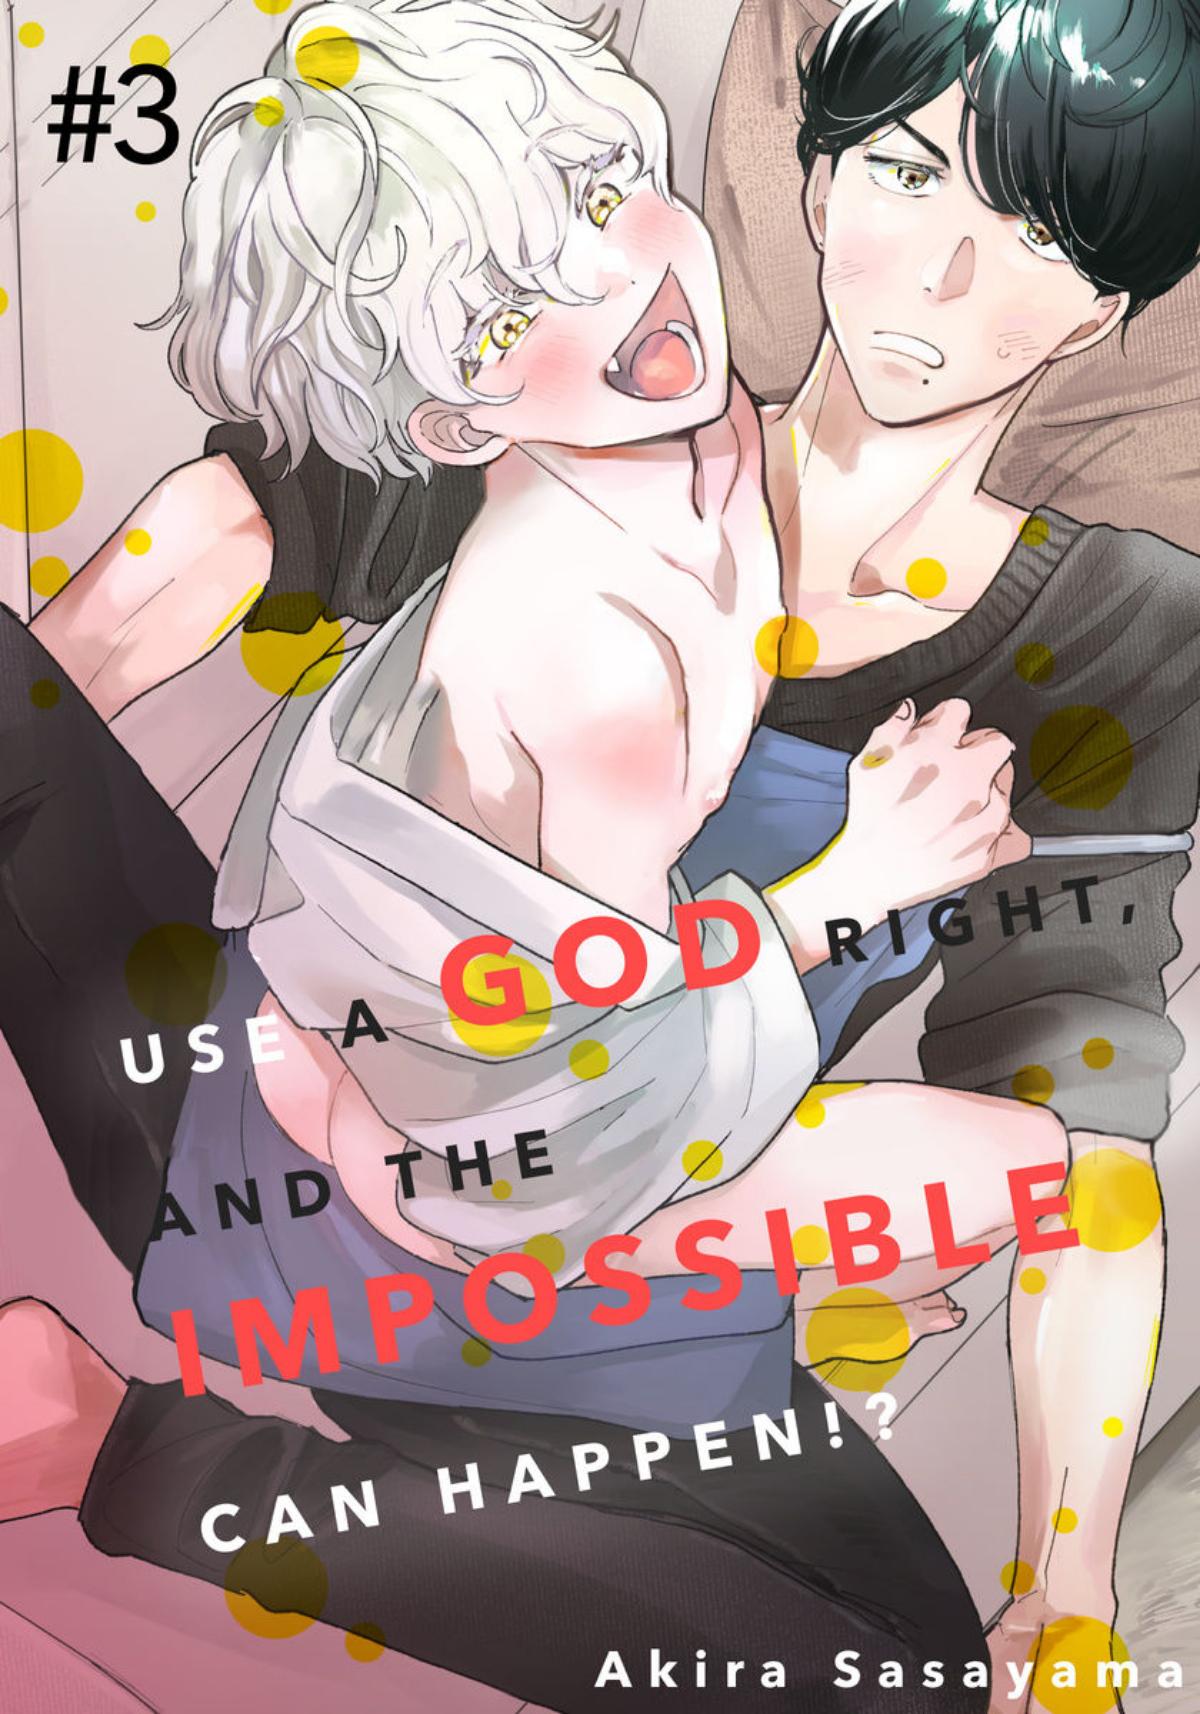 Thirdphp (Comms OPEN) on X: guess what? God Game manga is coming